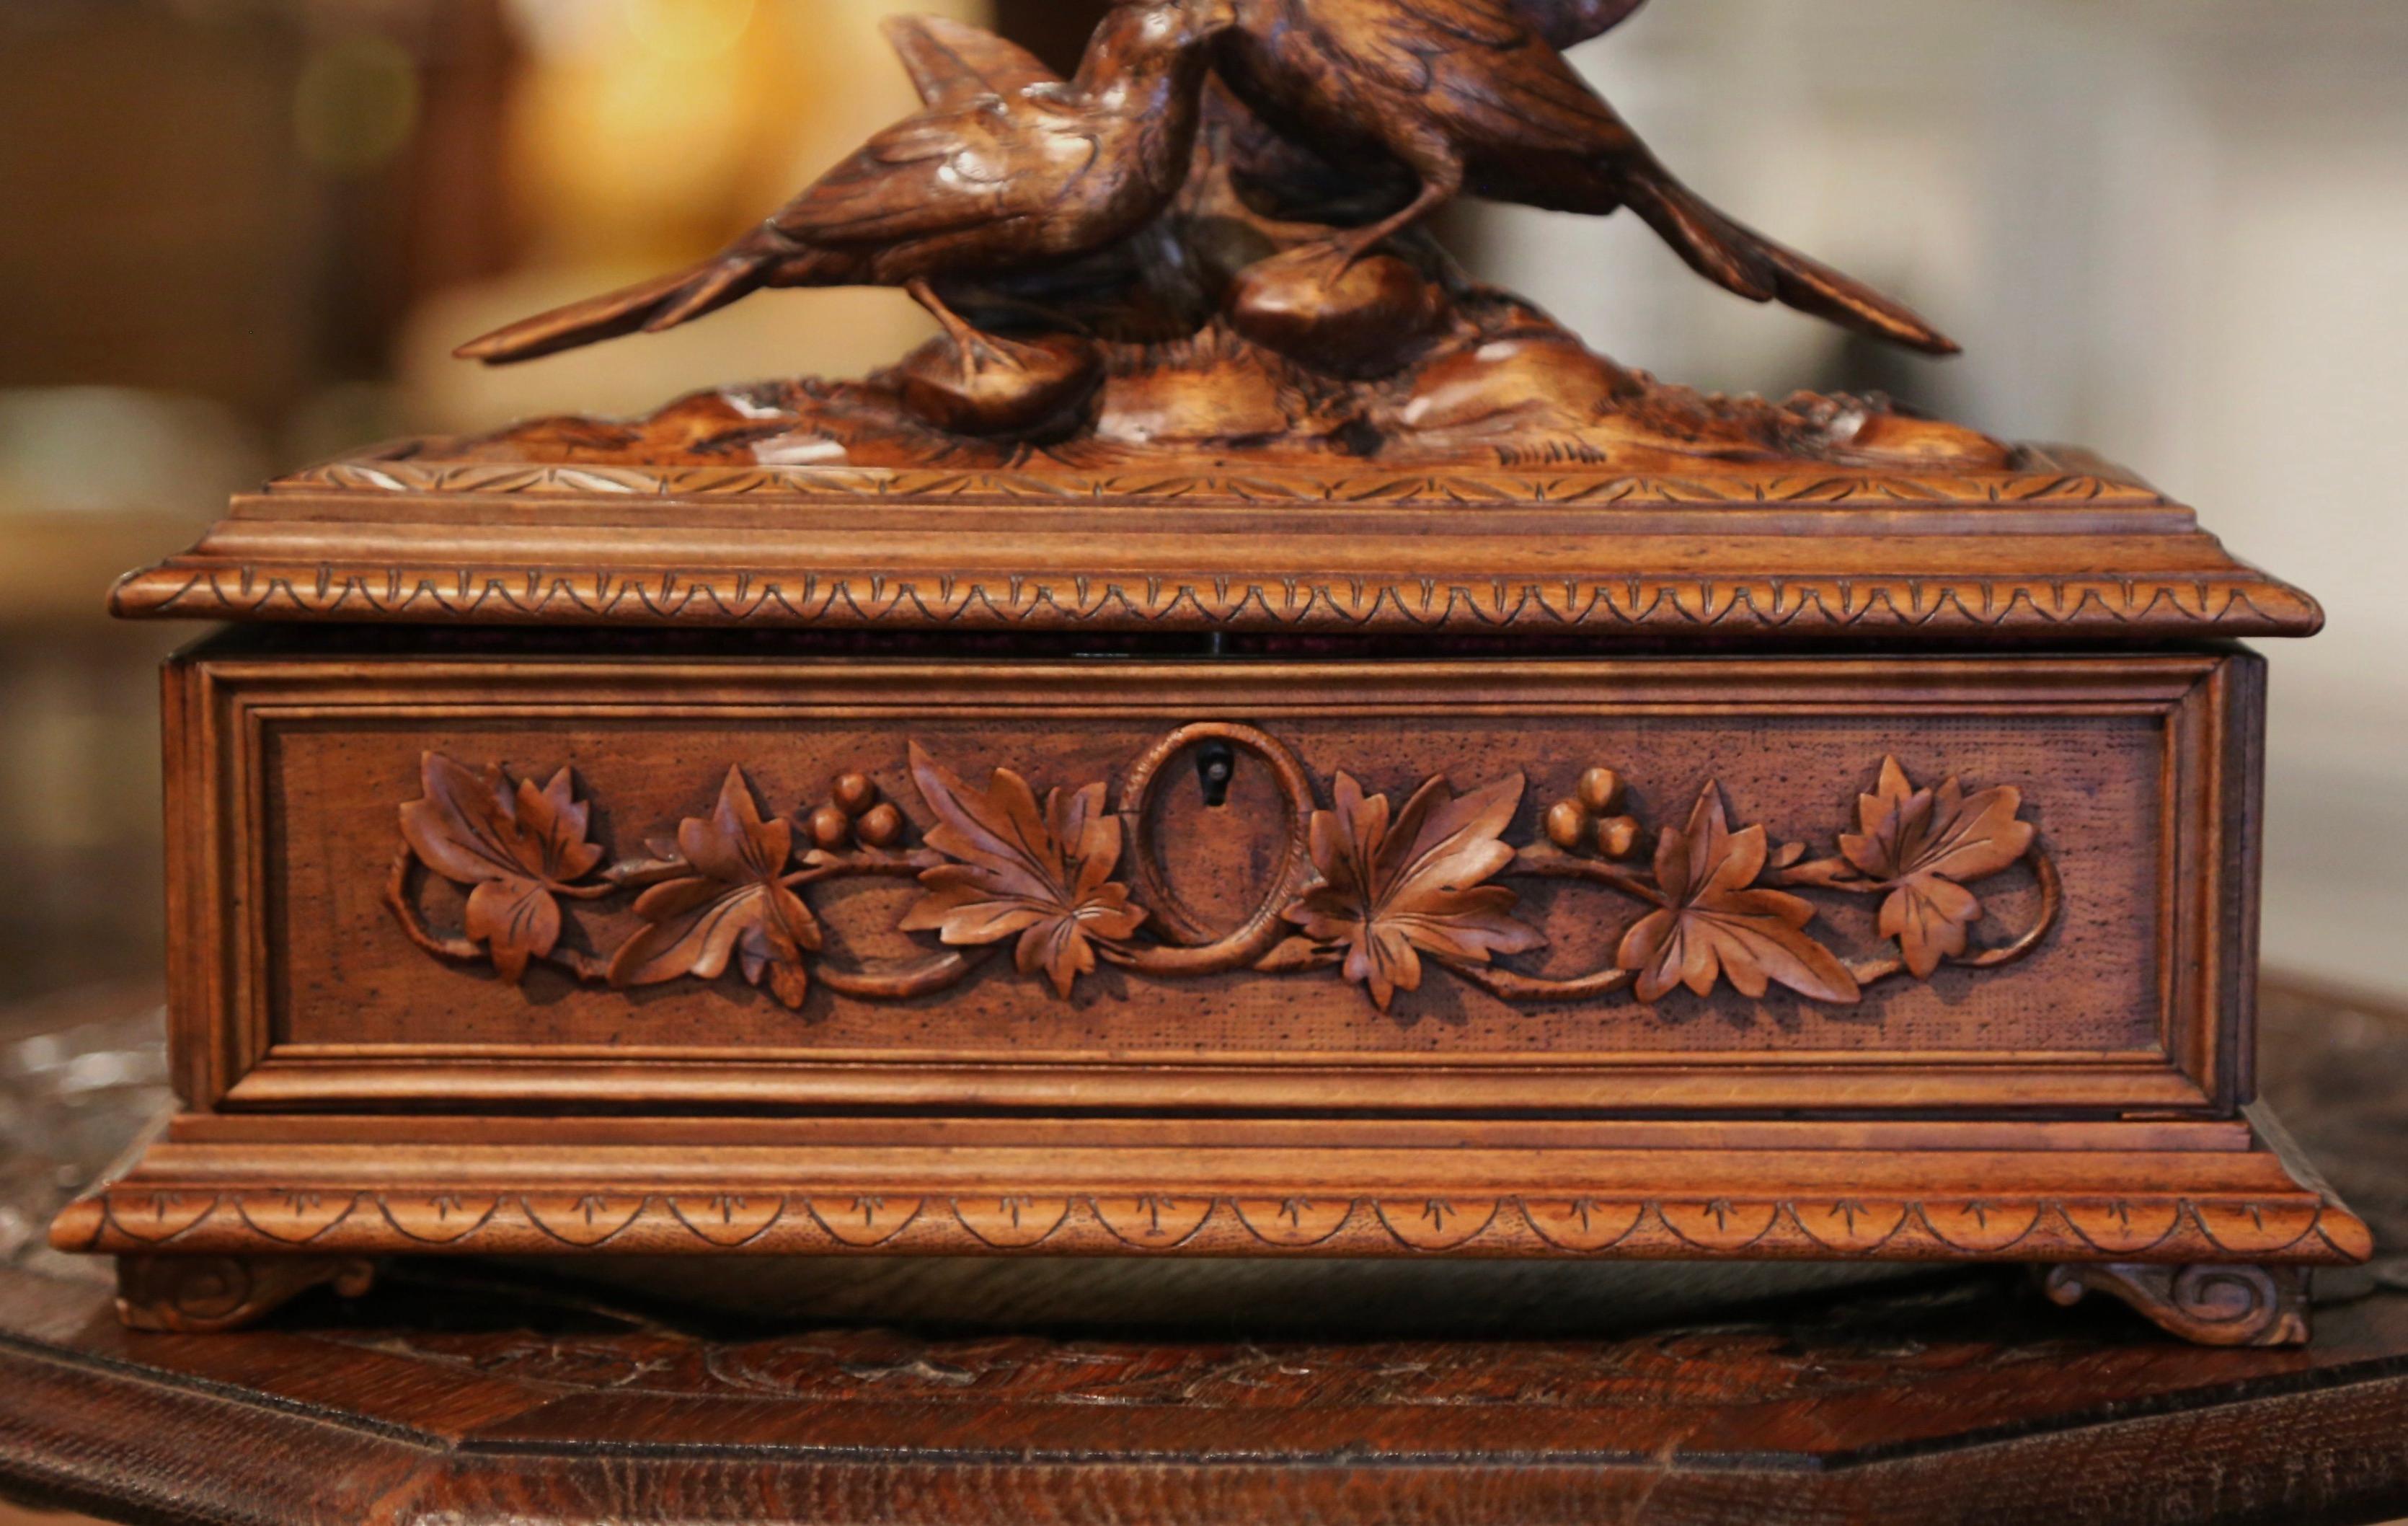 Hand-Carved 19th Century French Black Forest Carved Walnut Jewelry Box with Bird Motifs